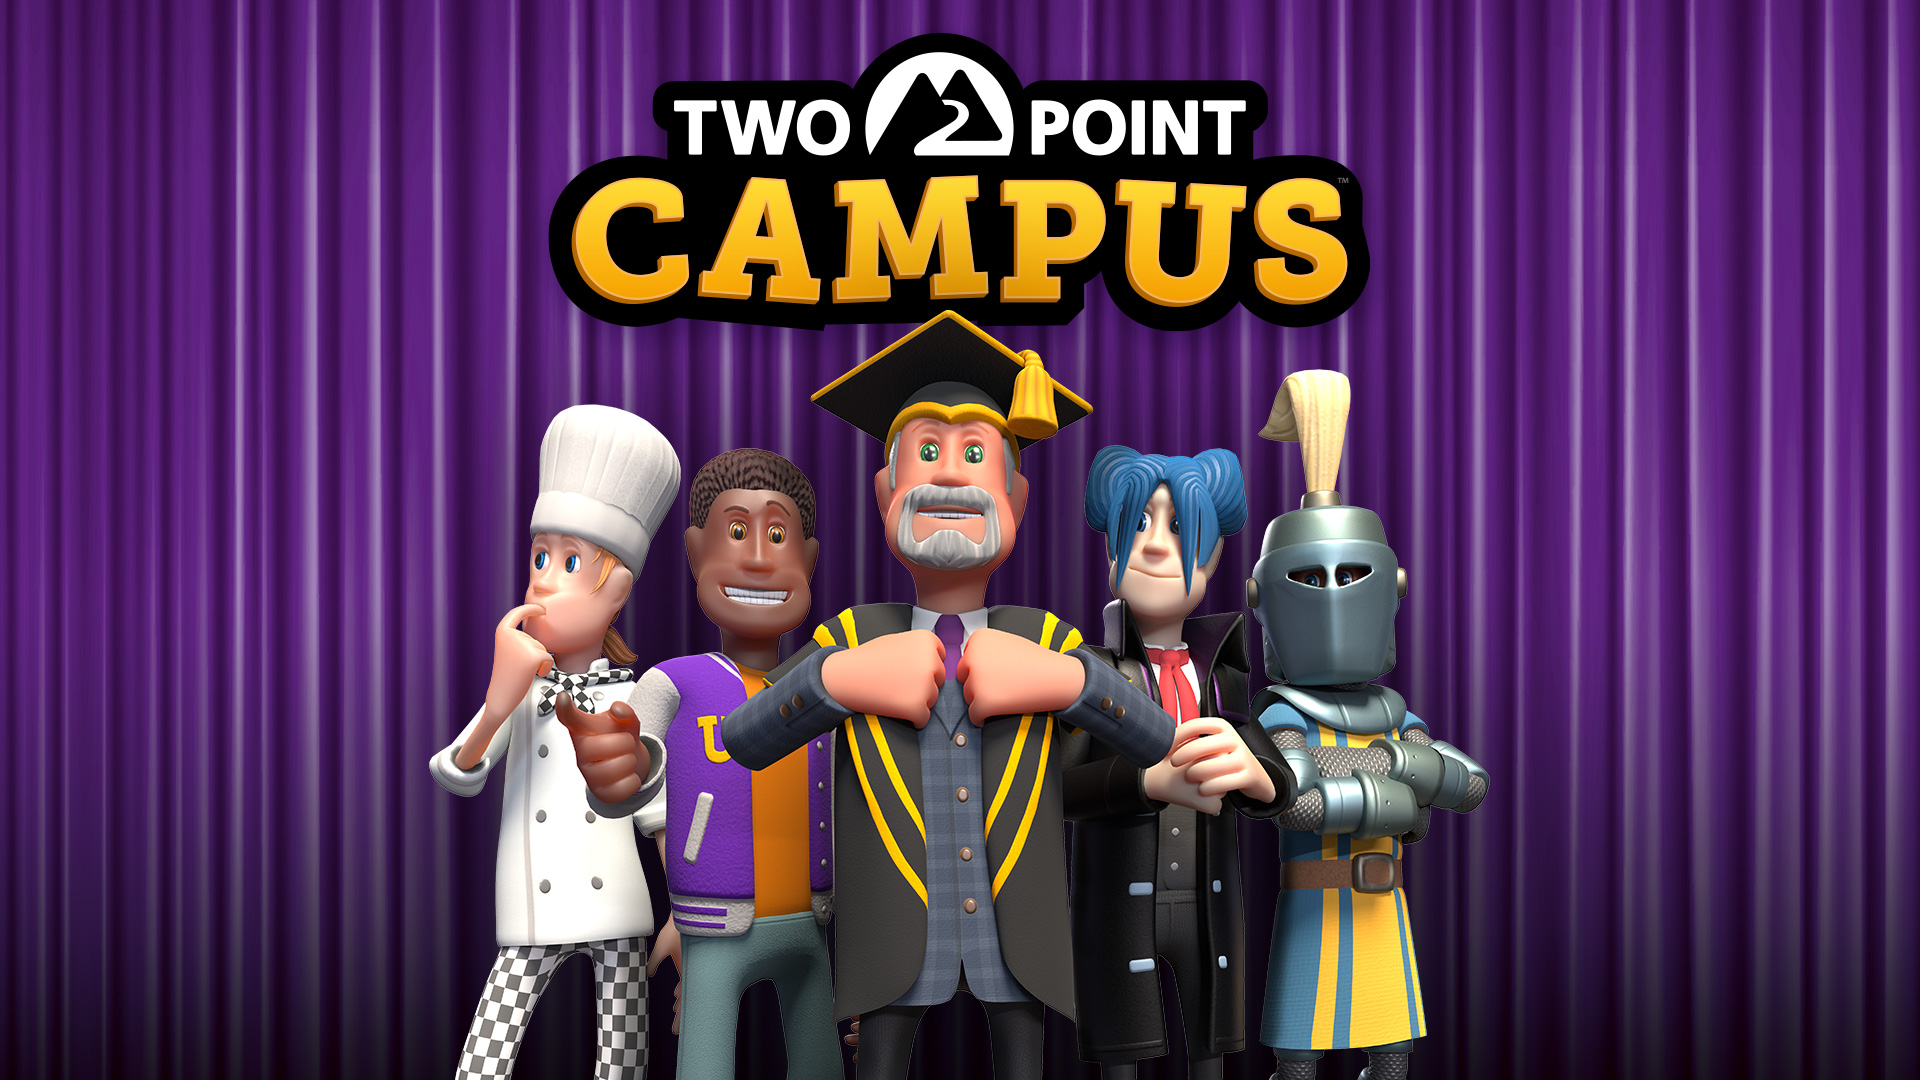 《Two Point Campus》 現已在全平台發售！